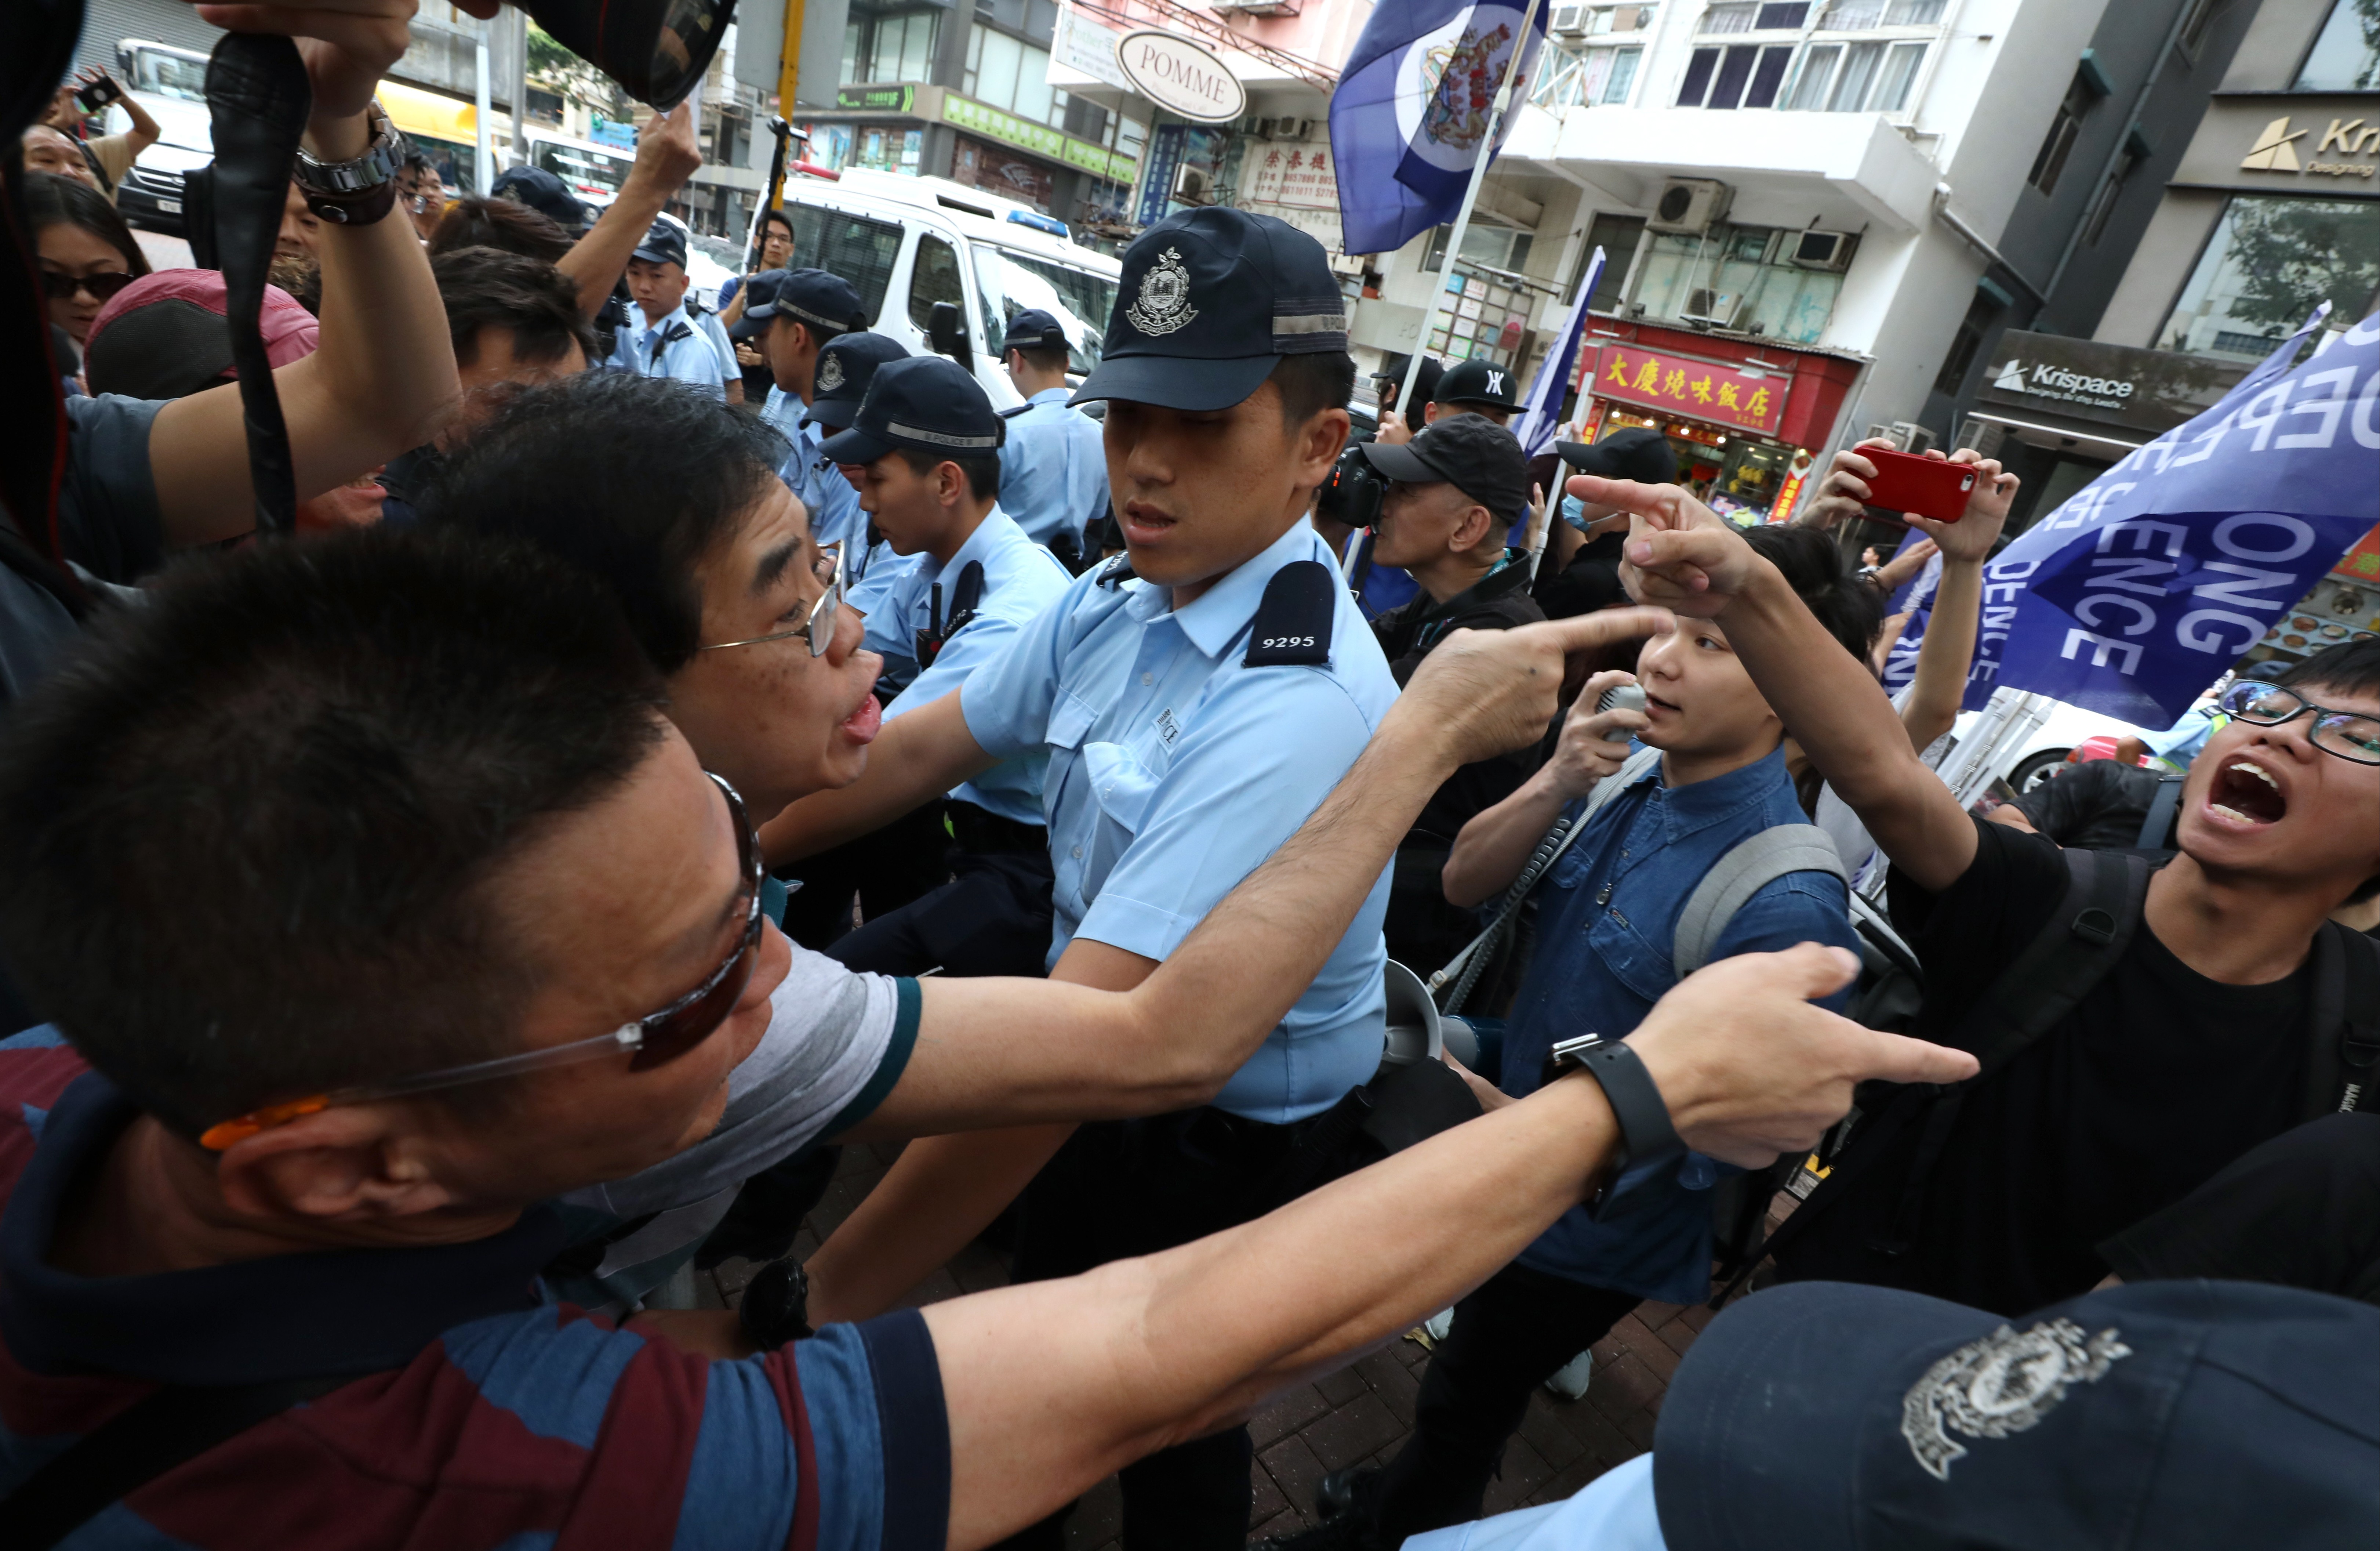 Demonstrators clash at a protest in Wan Chai on October 1, China’s National Day. Photo: Felix Wong